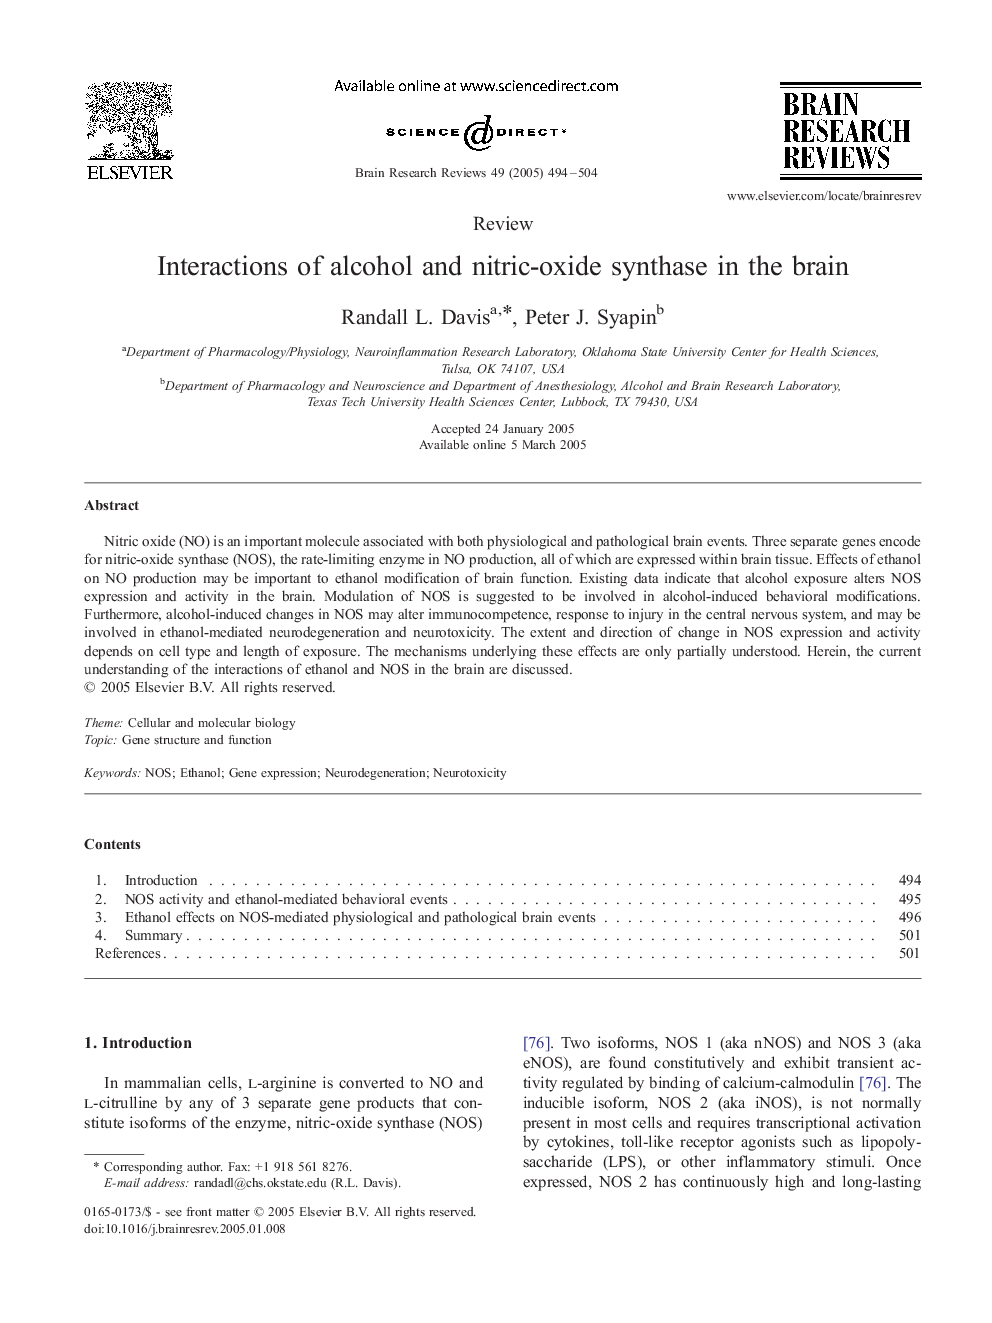 Interactions of alcohol and nitric-oxide synthase in the brain